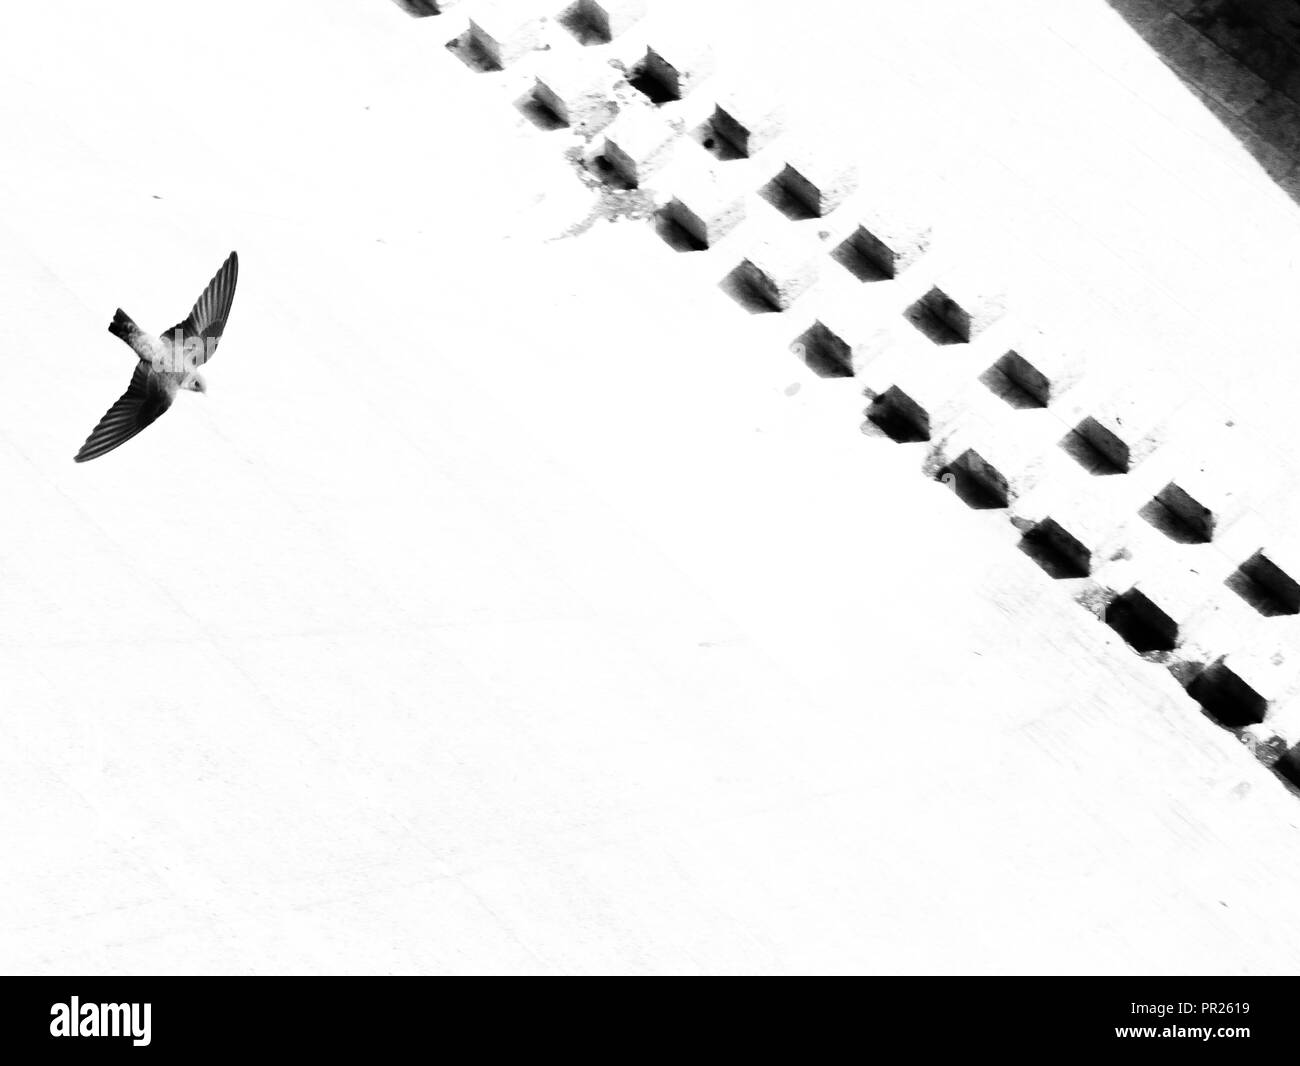 Black and white B&W black bird flying over a white background with black dots and abstract stairs. High view and veryesoteric abstract birds. Stock Photo